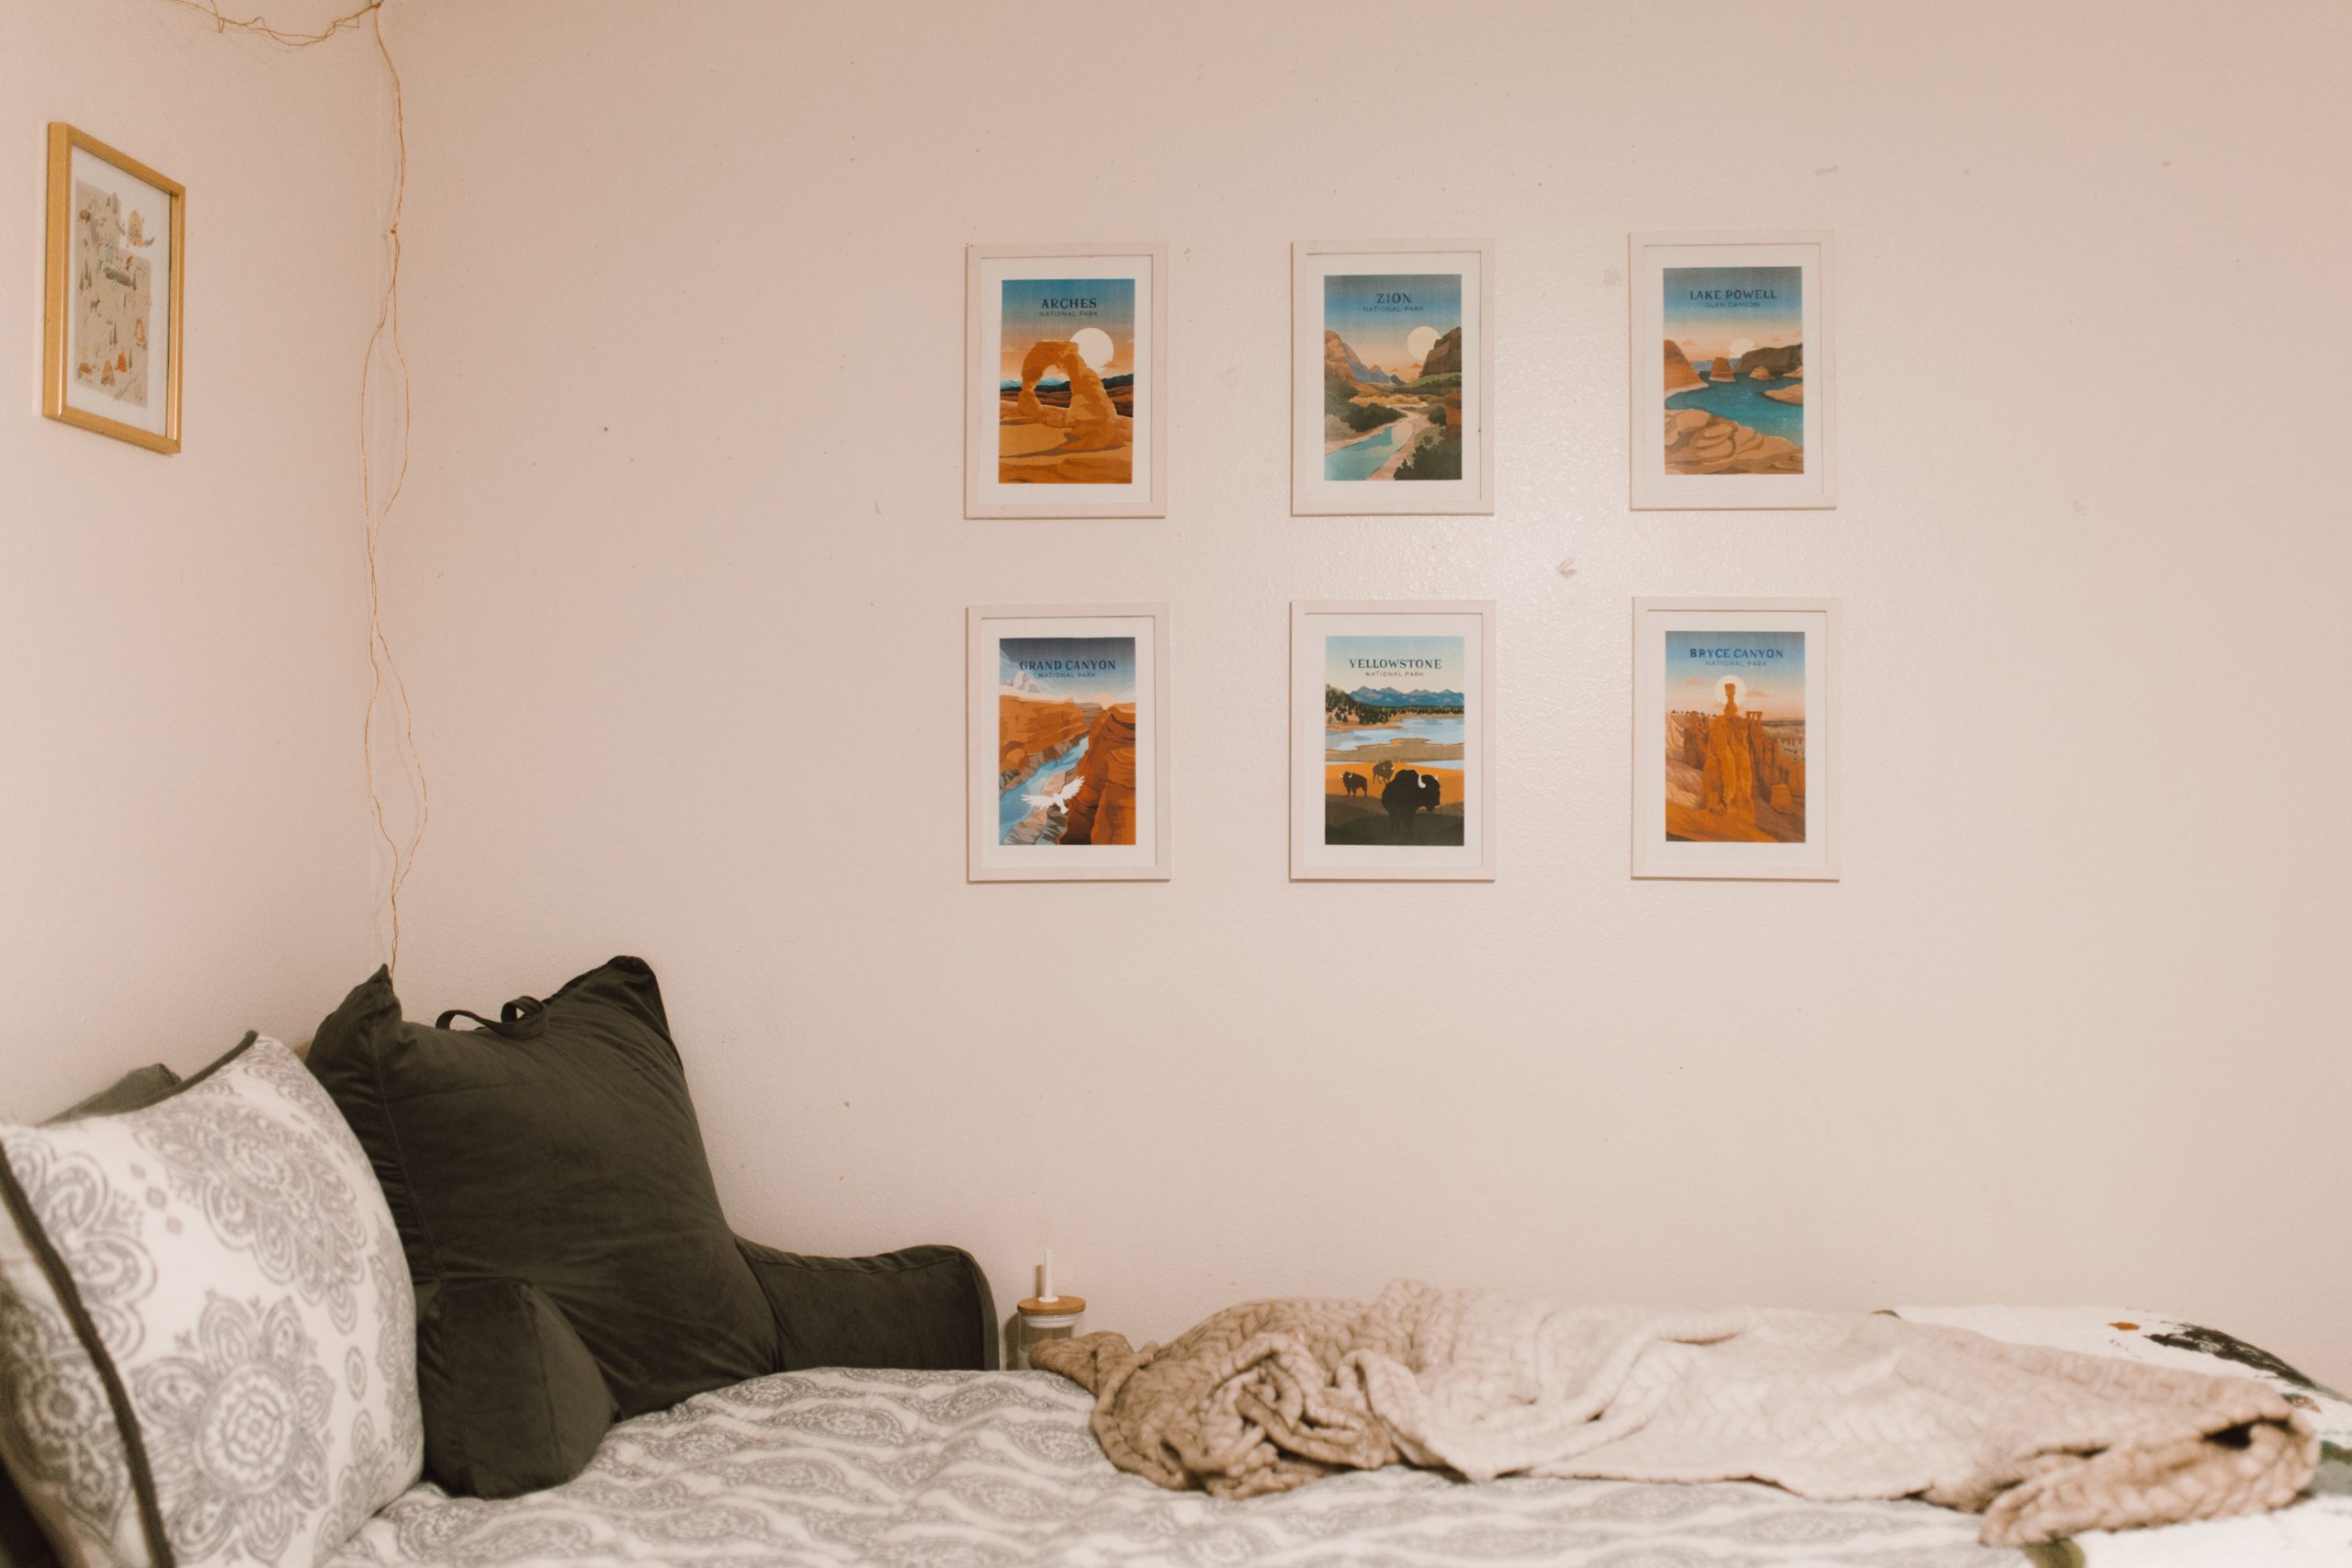 Dorm room decorations to spruce up your bedroom